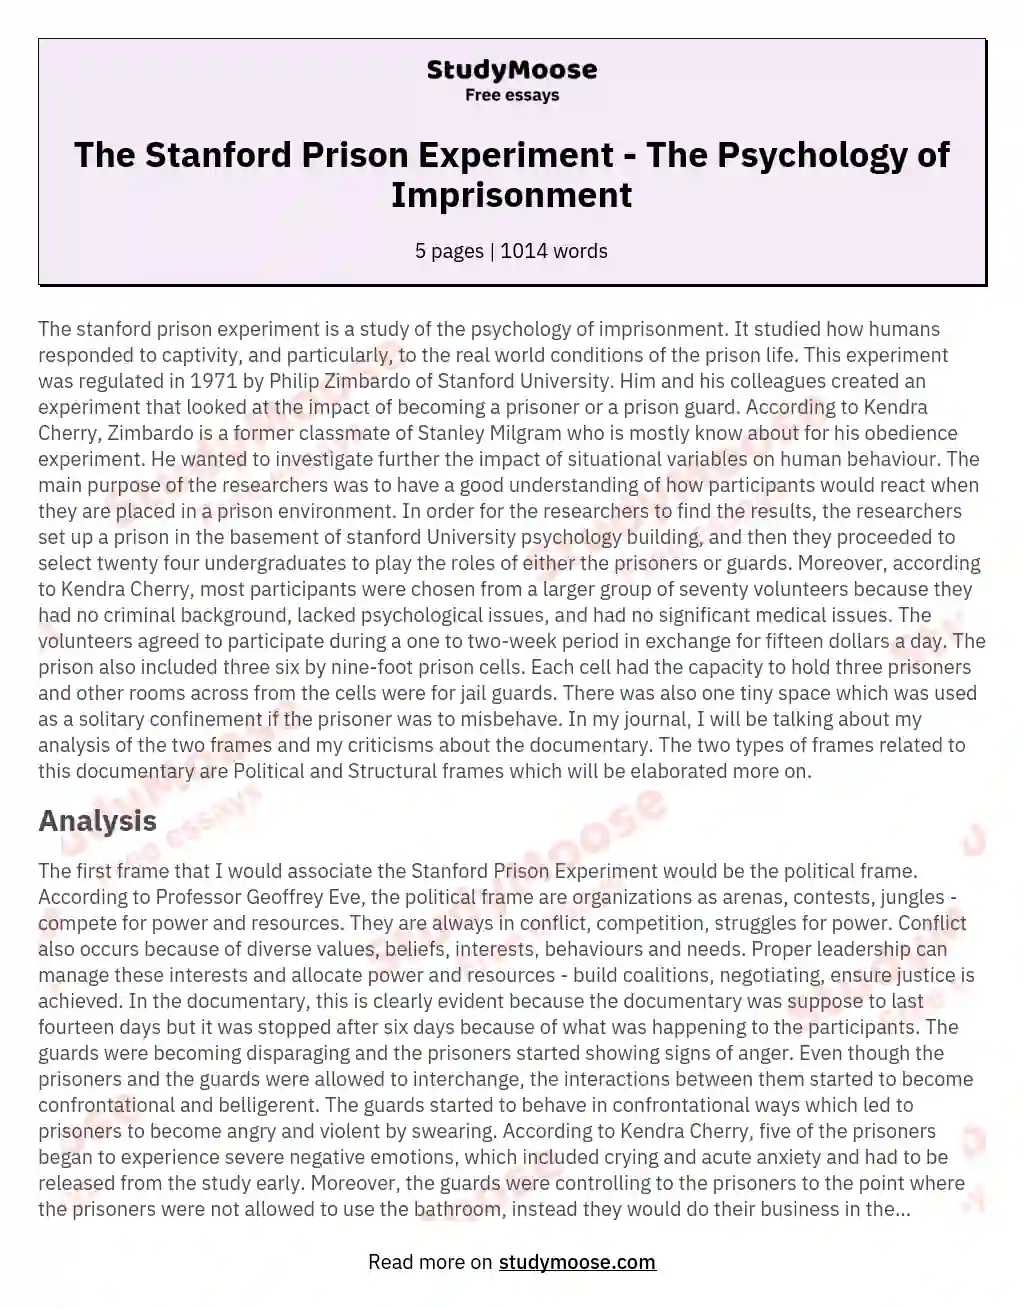 The Stanford Prison Experiment - The Psychology of Imprisonment essay